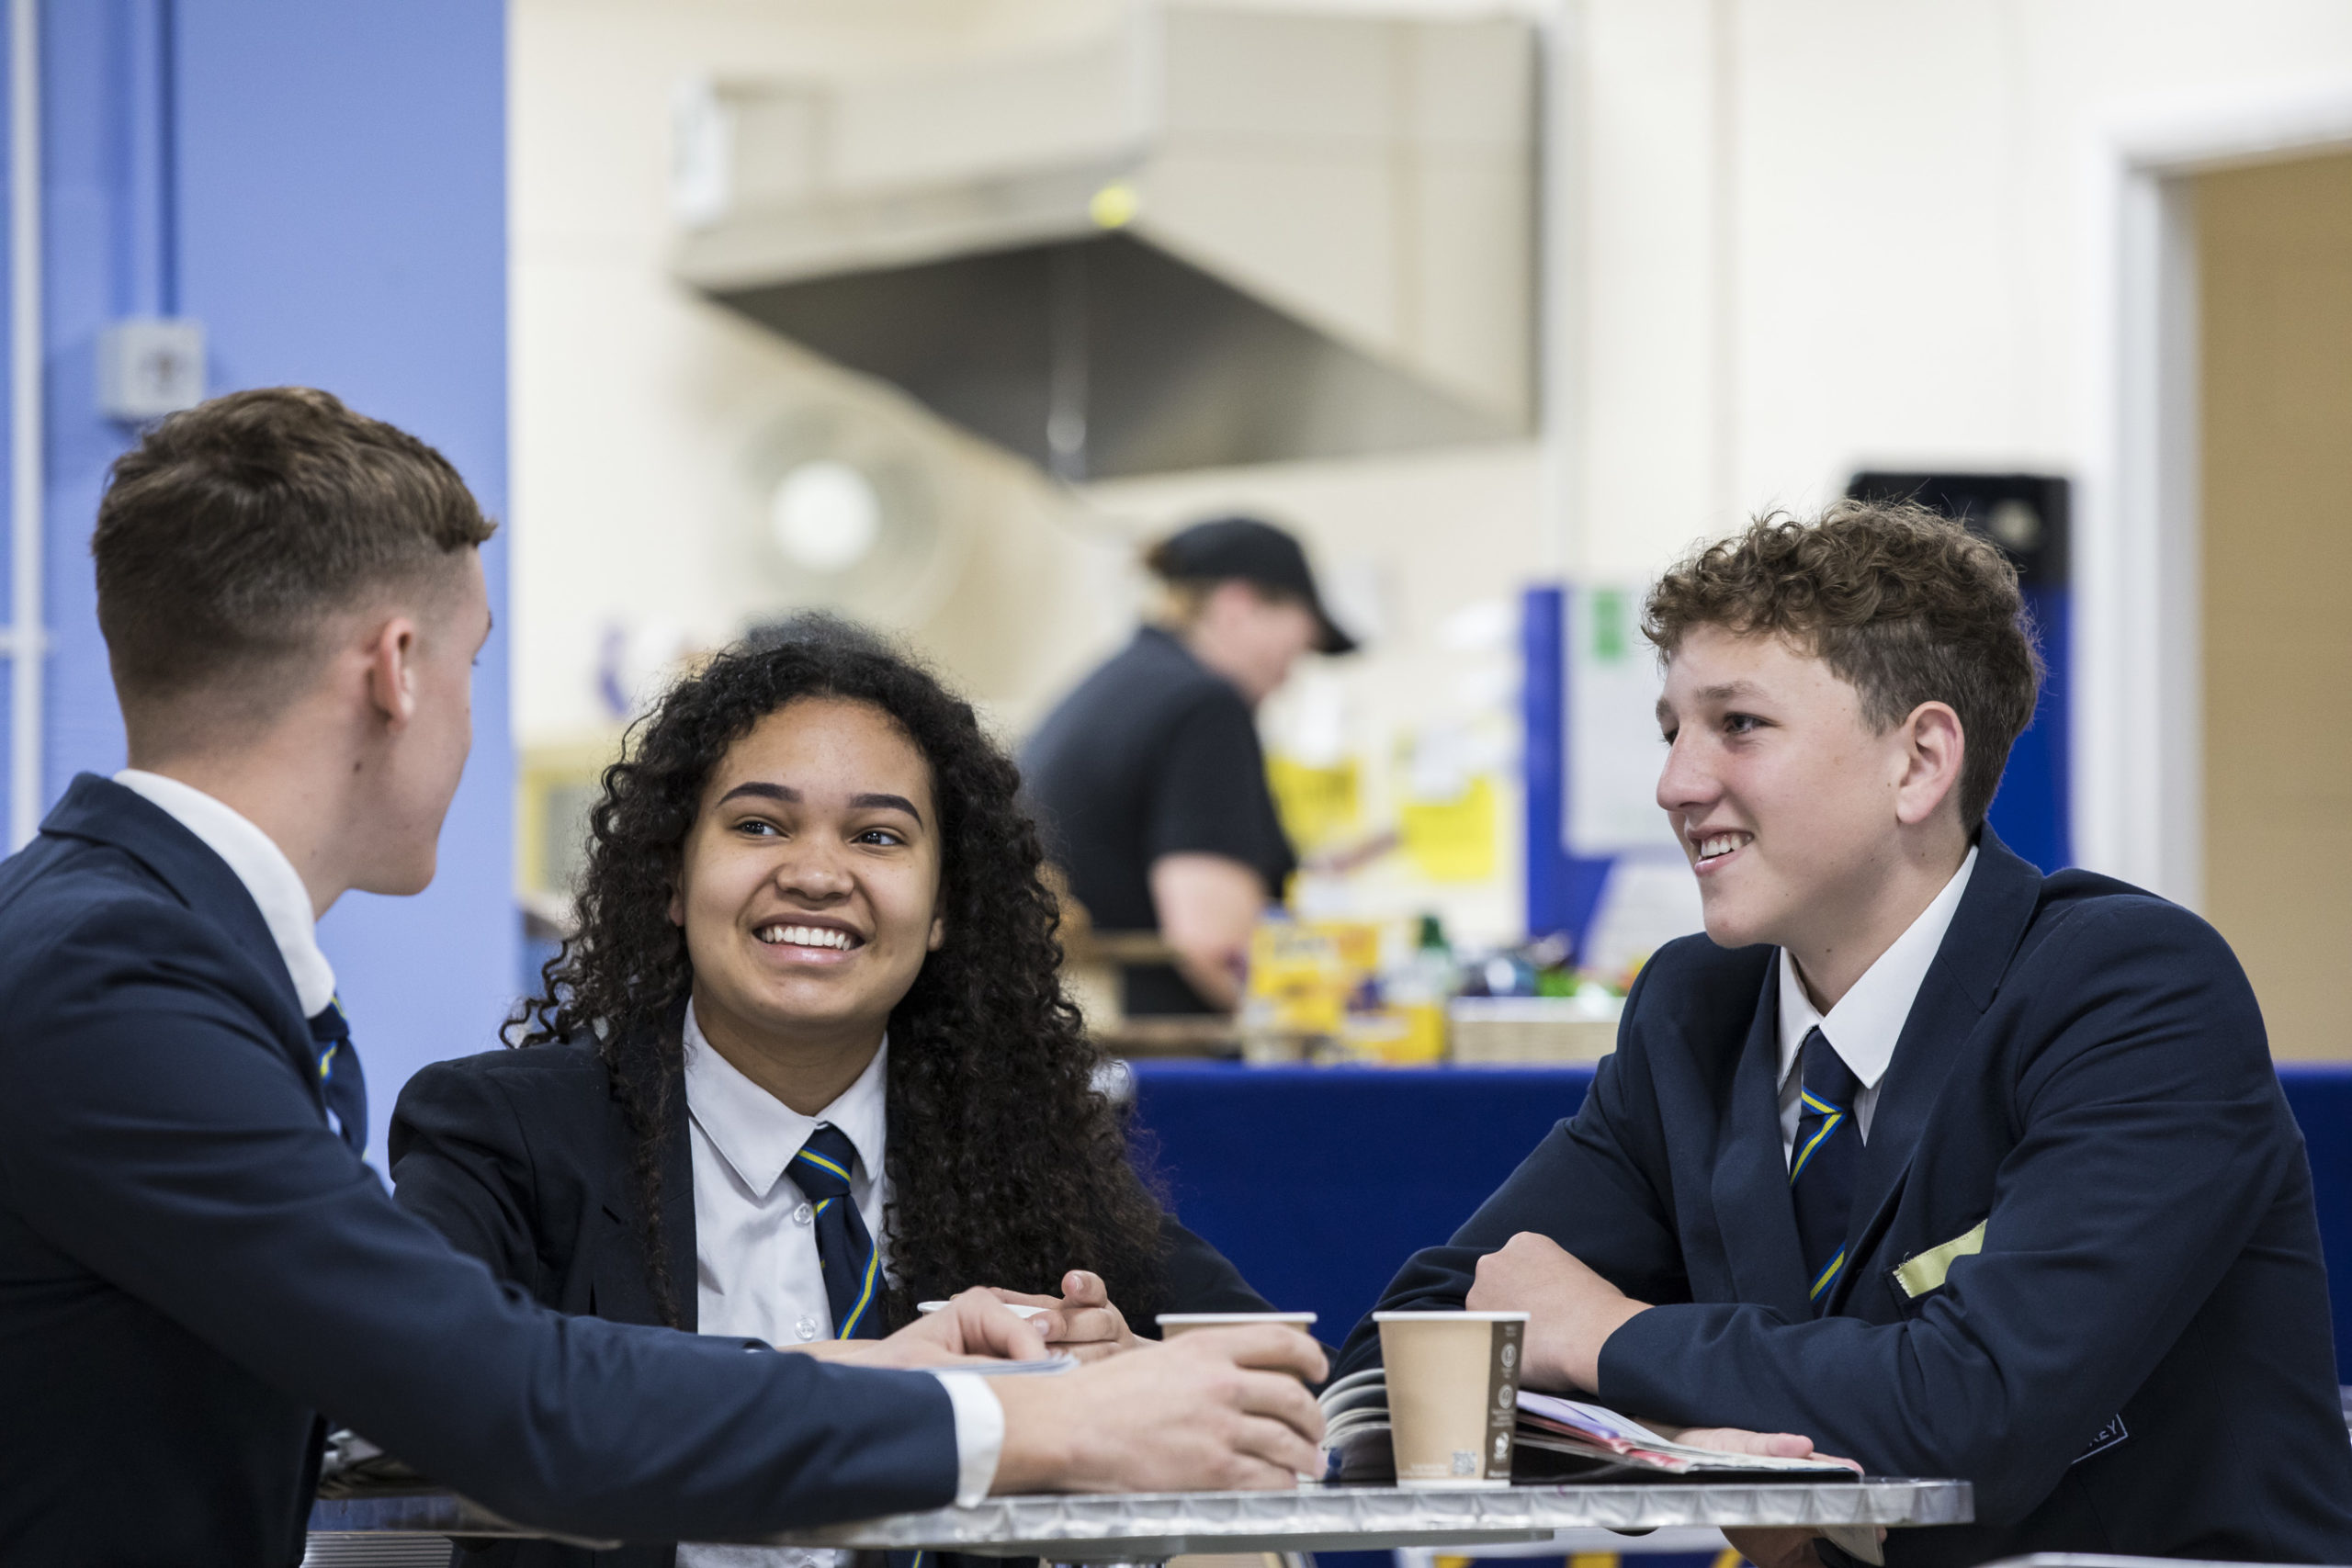 Two boys and One female sixth form students laughing and talking in the school canteen